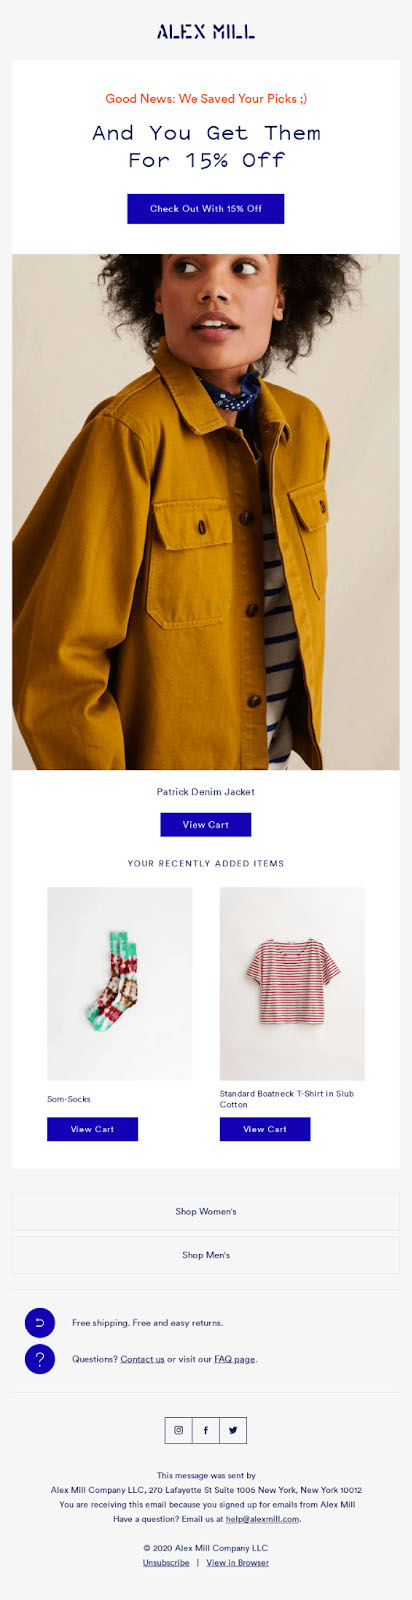 Alex Mill's cart abandonment email with a discount and selection of new arrivals.